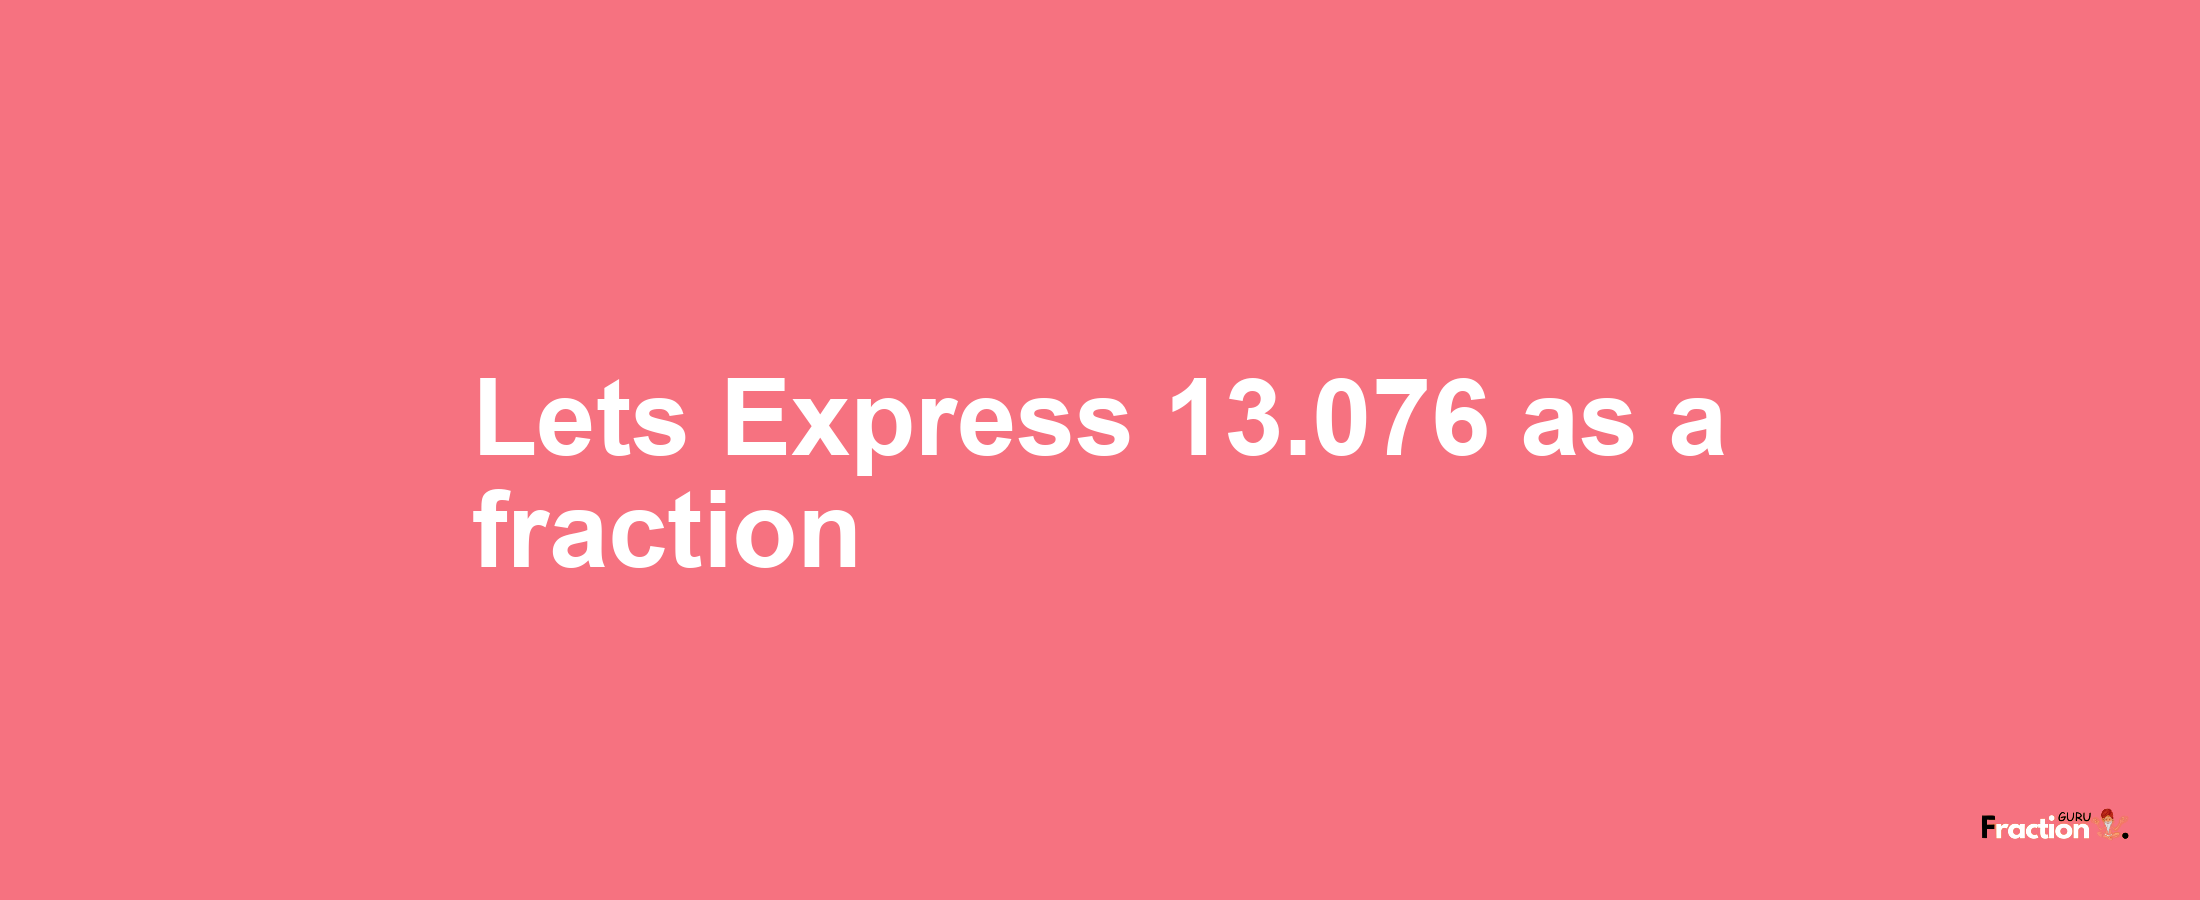 Lets Express 13.076 as afraction